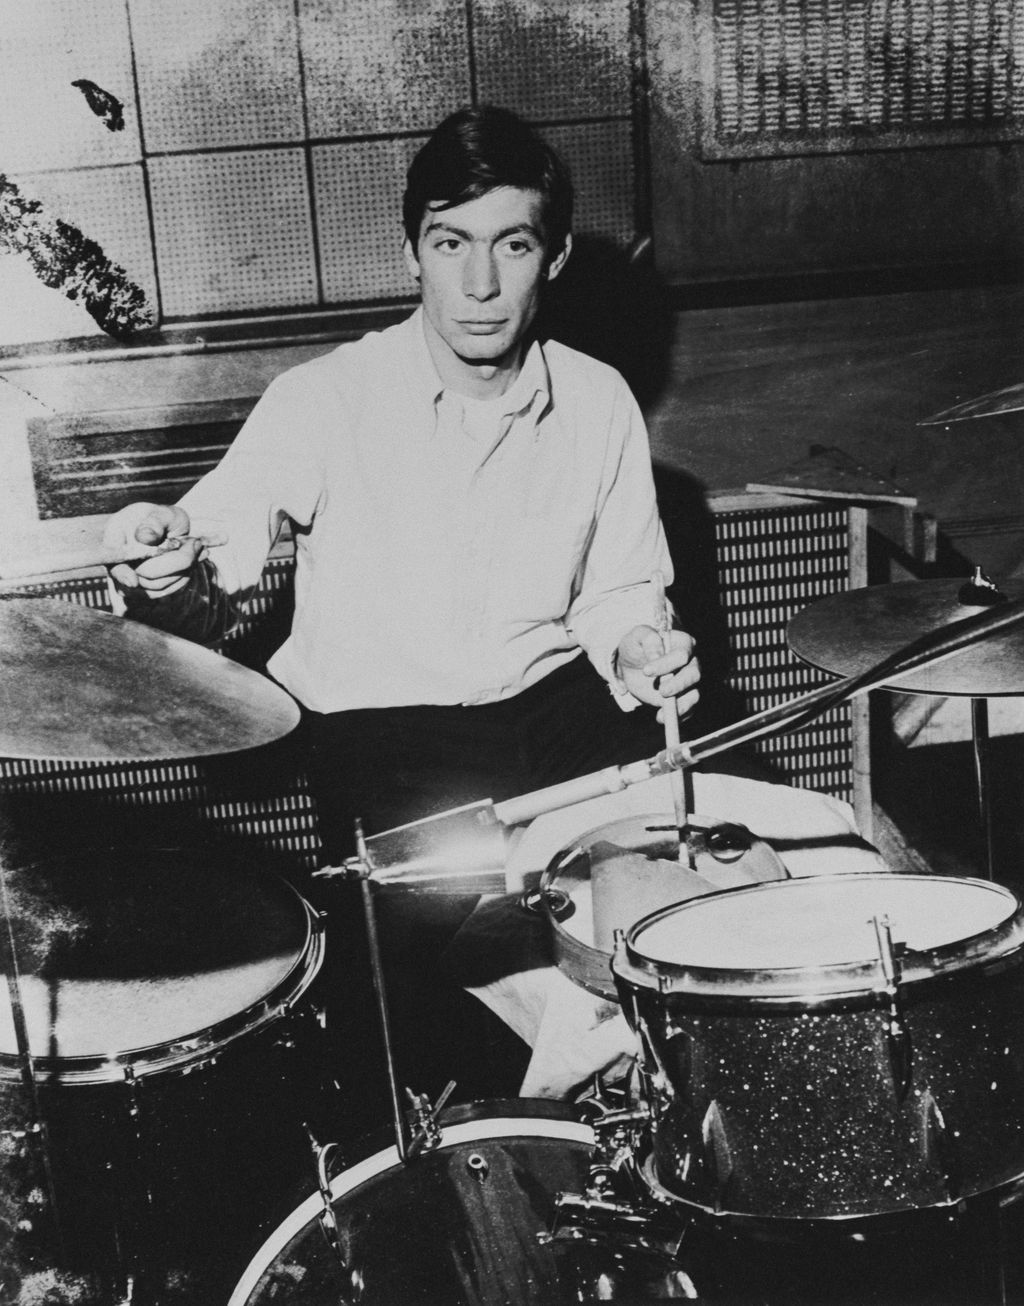 English drummer Charlie Watts of the Rolling Stones, circa 1965.   (Photo by Keystone Features/Hulton Archive/Getty Images)